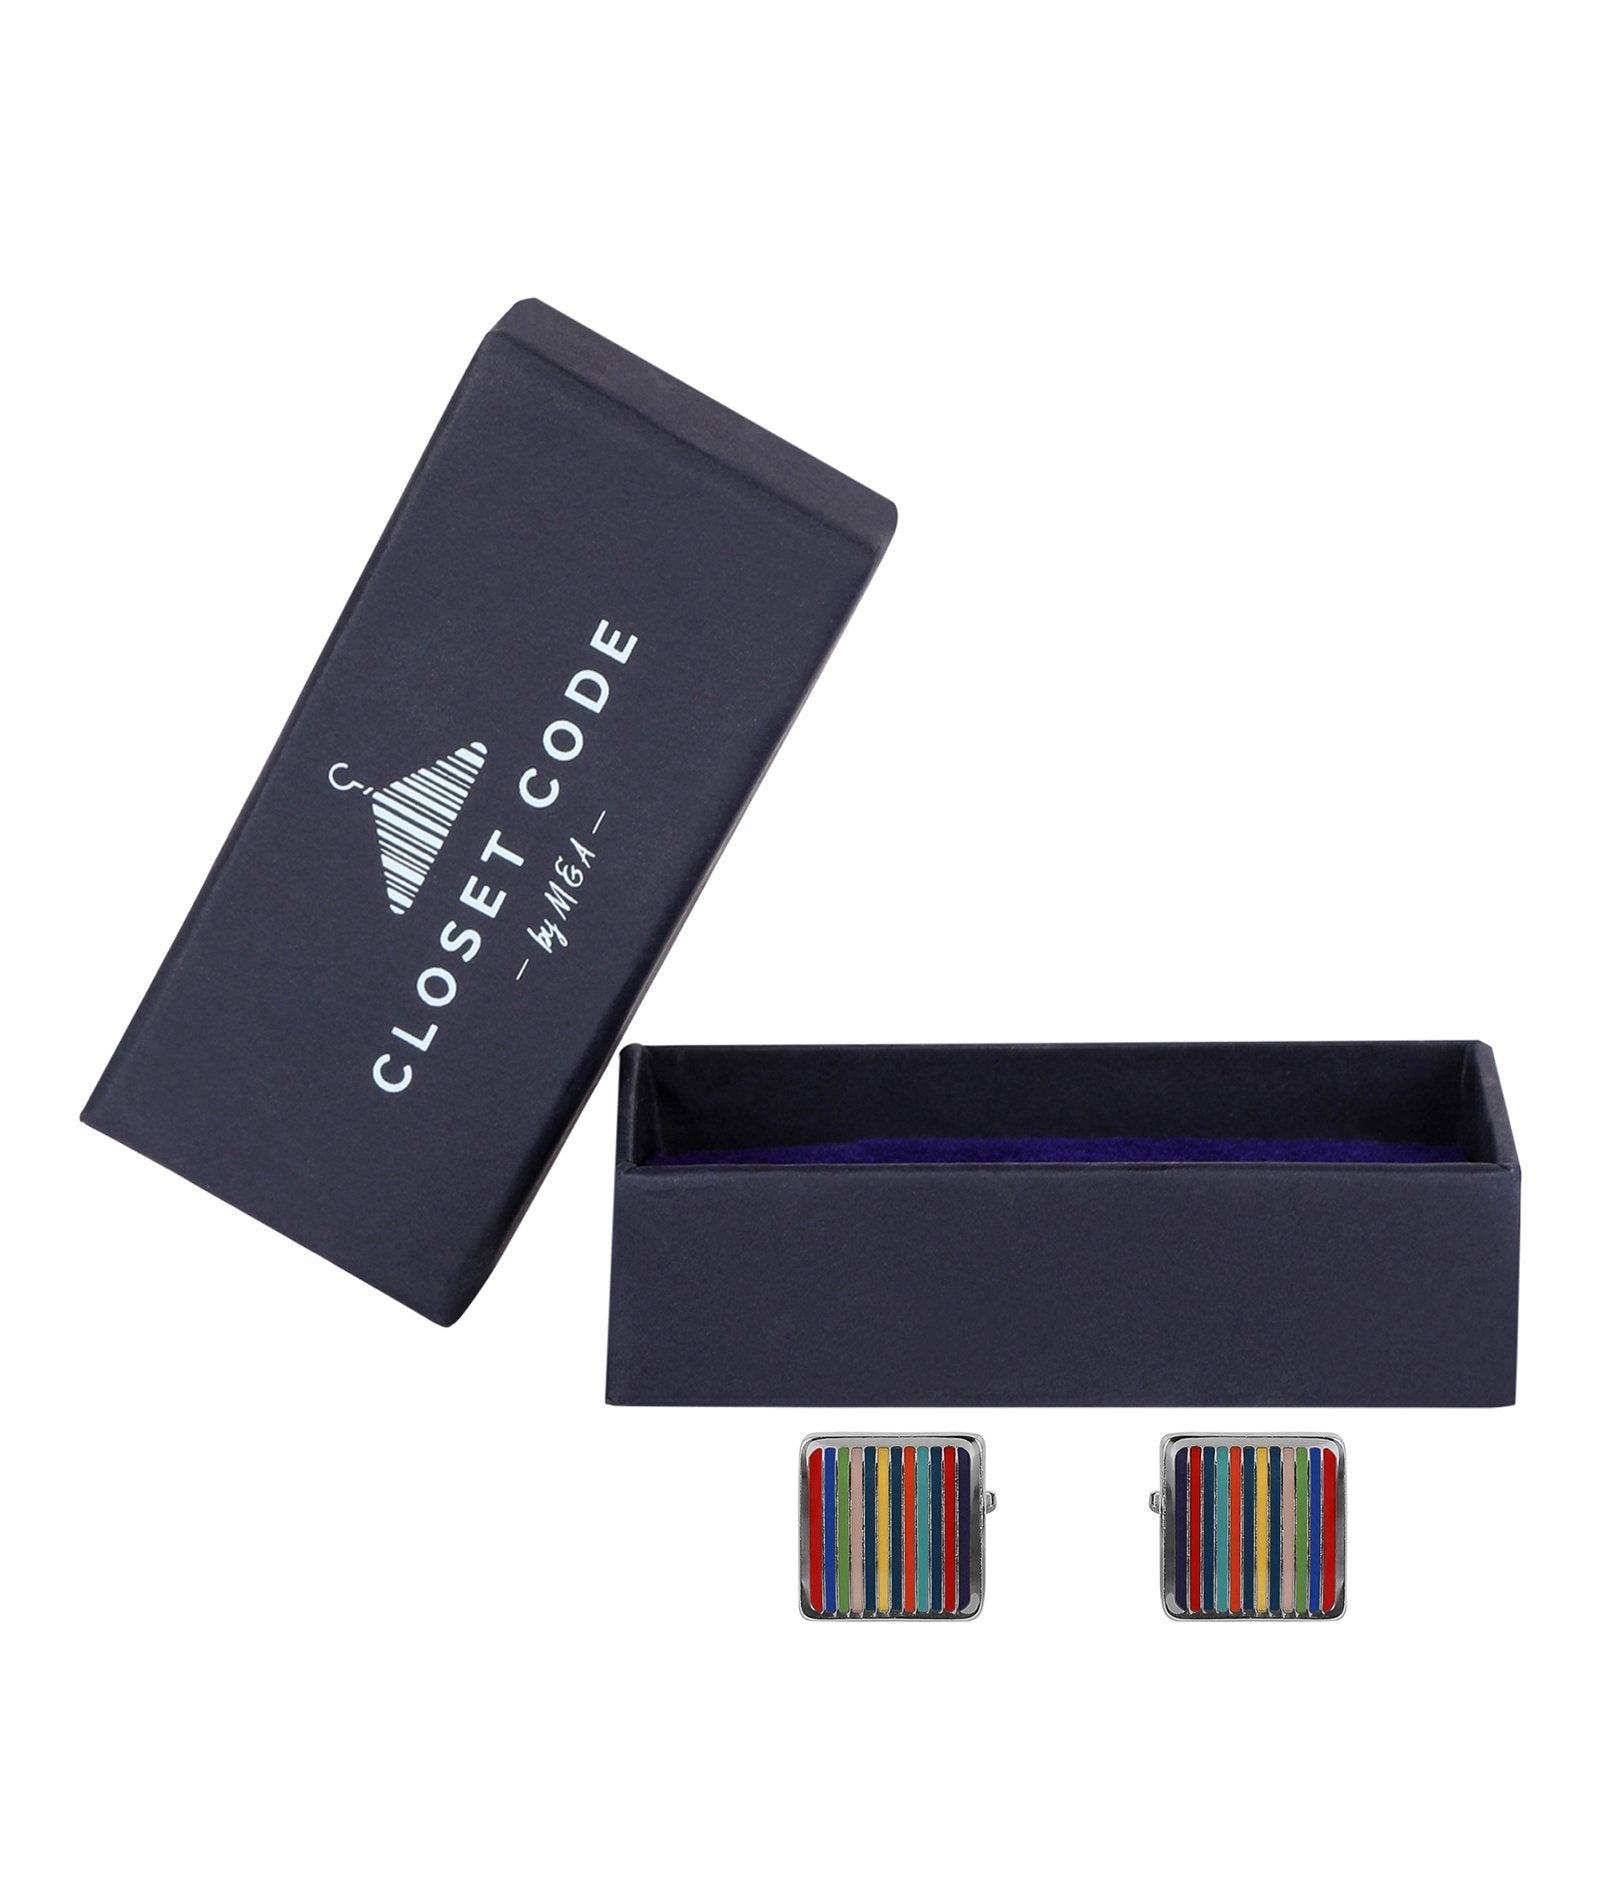 Xylophone square Cufflink